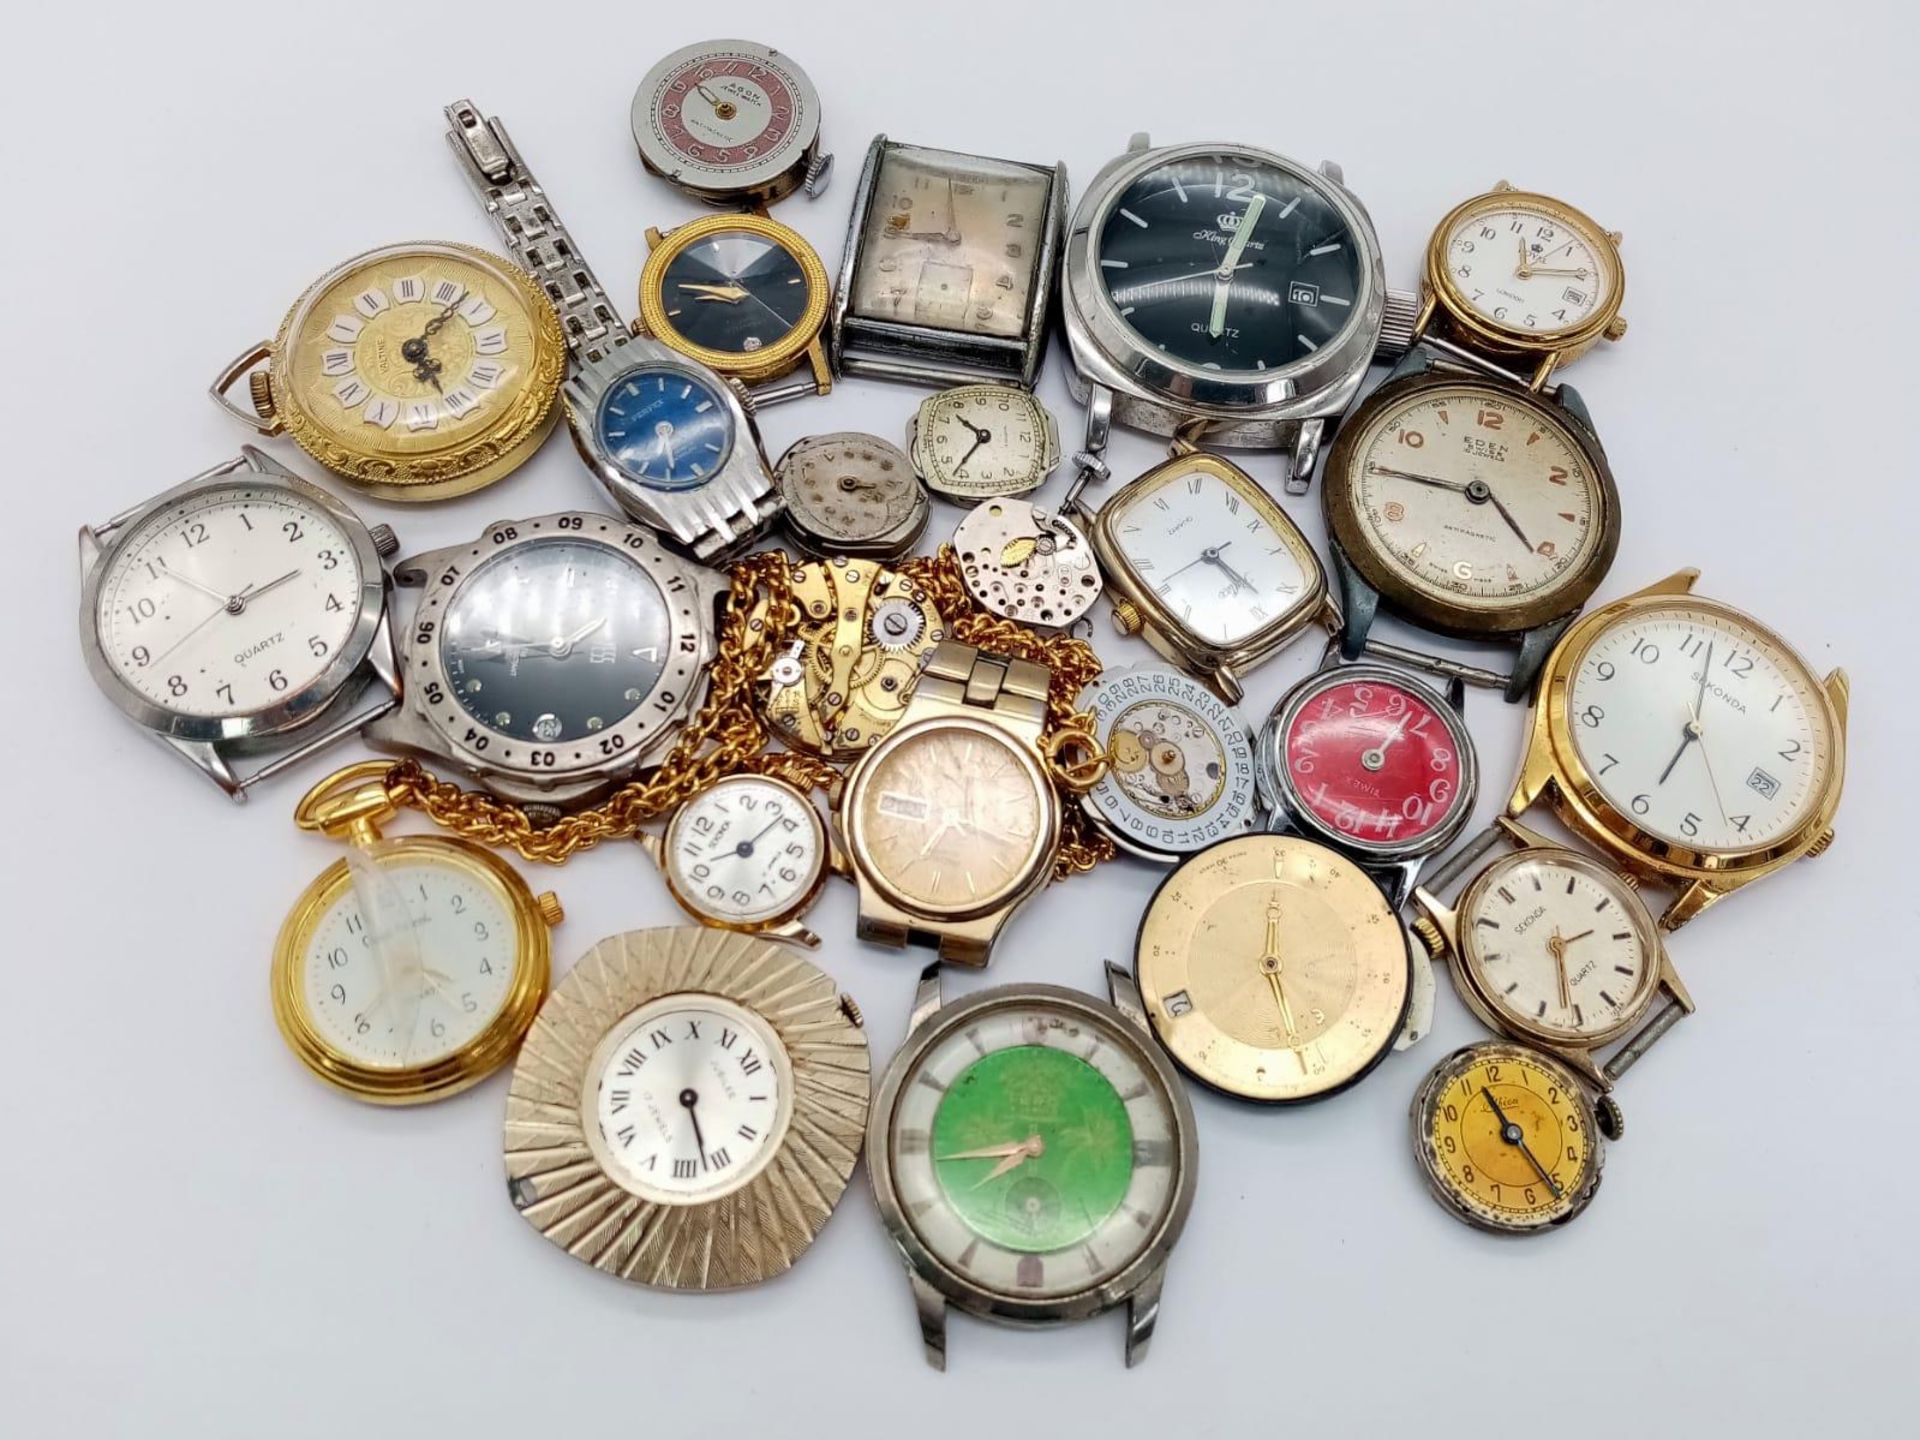 18 Watch Cases with Movements PLUS Nine Loose Watch Movements. Great for spare parts.